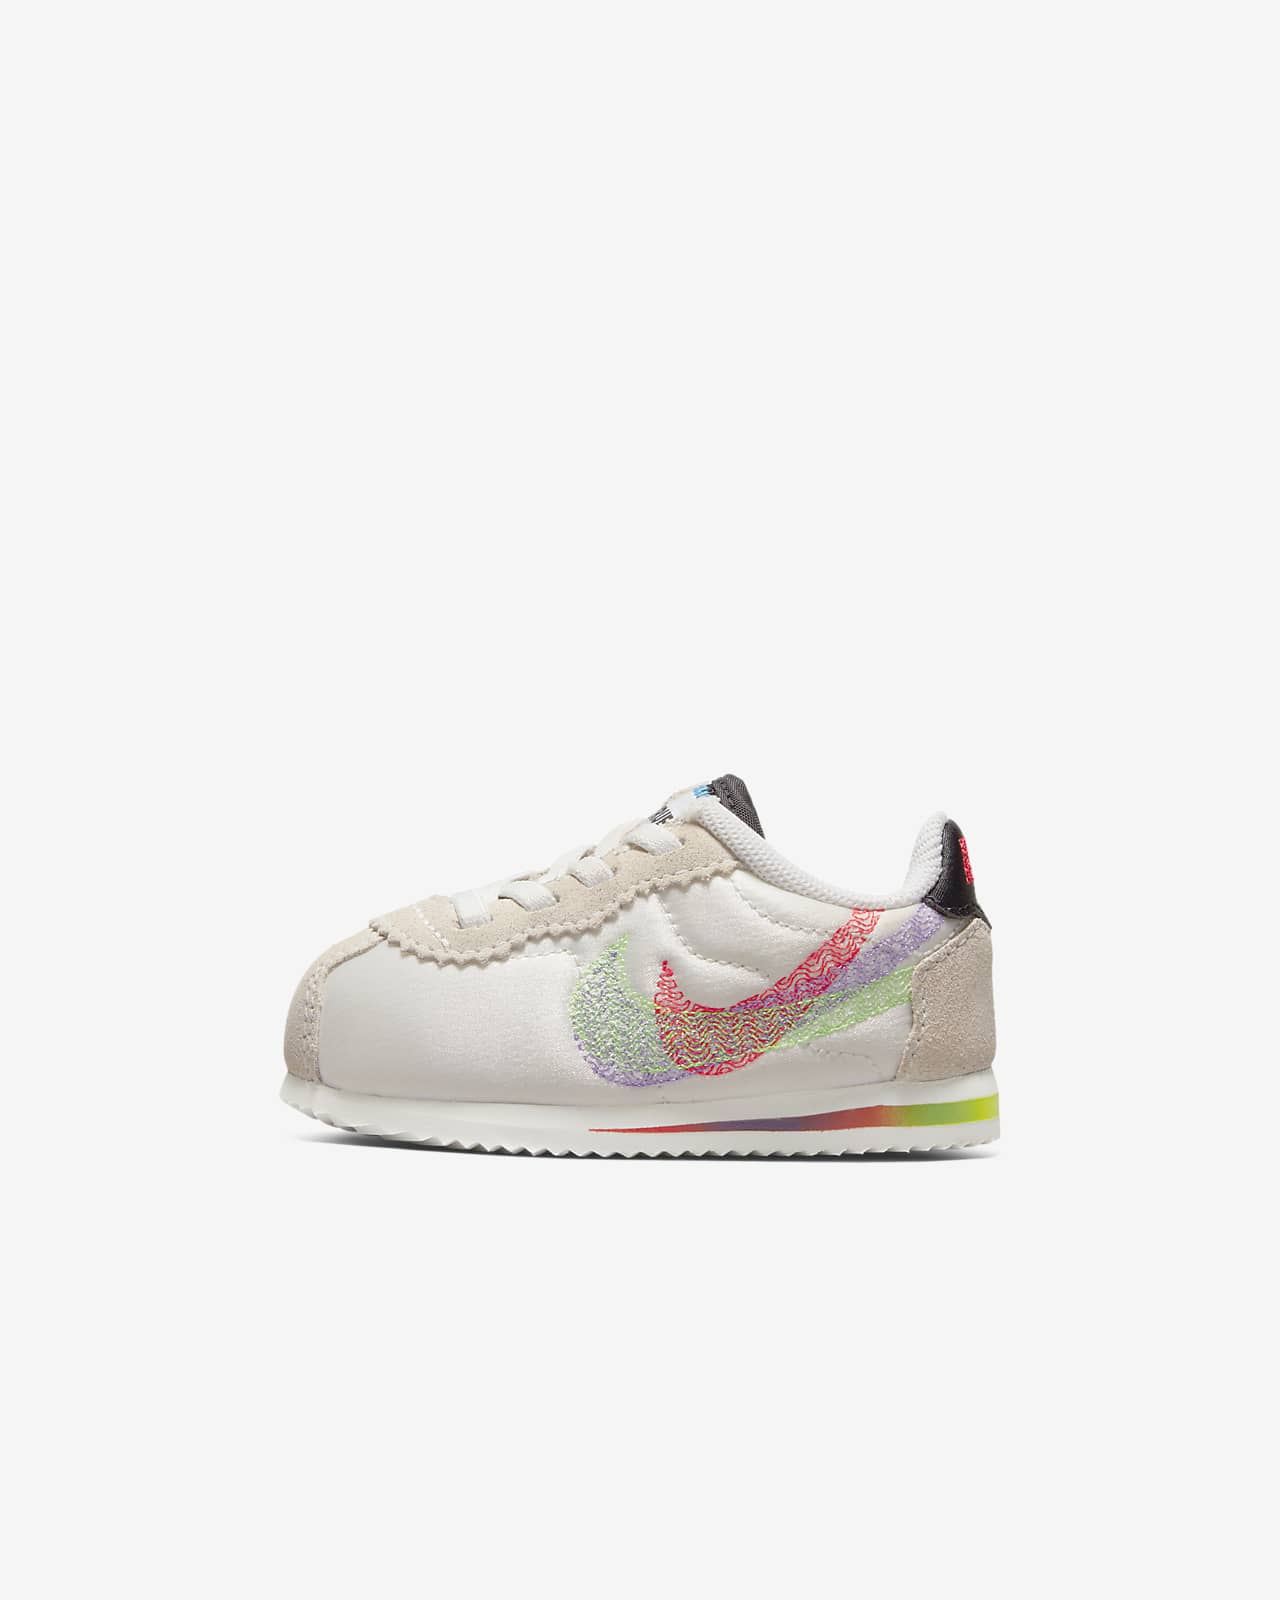 Nike Cortez Be True Baby/Toddler Shoes